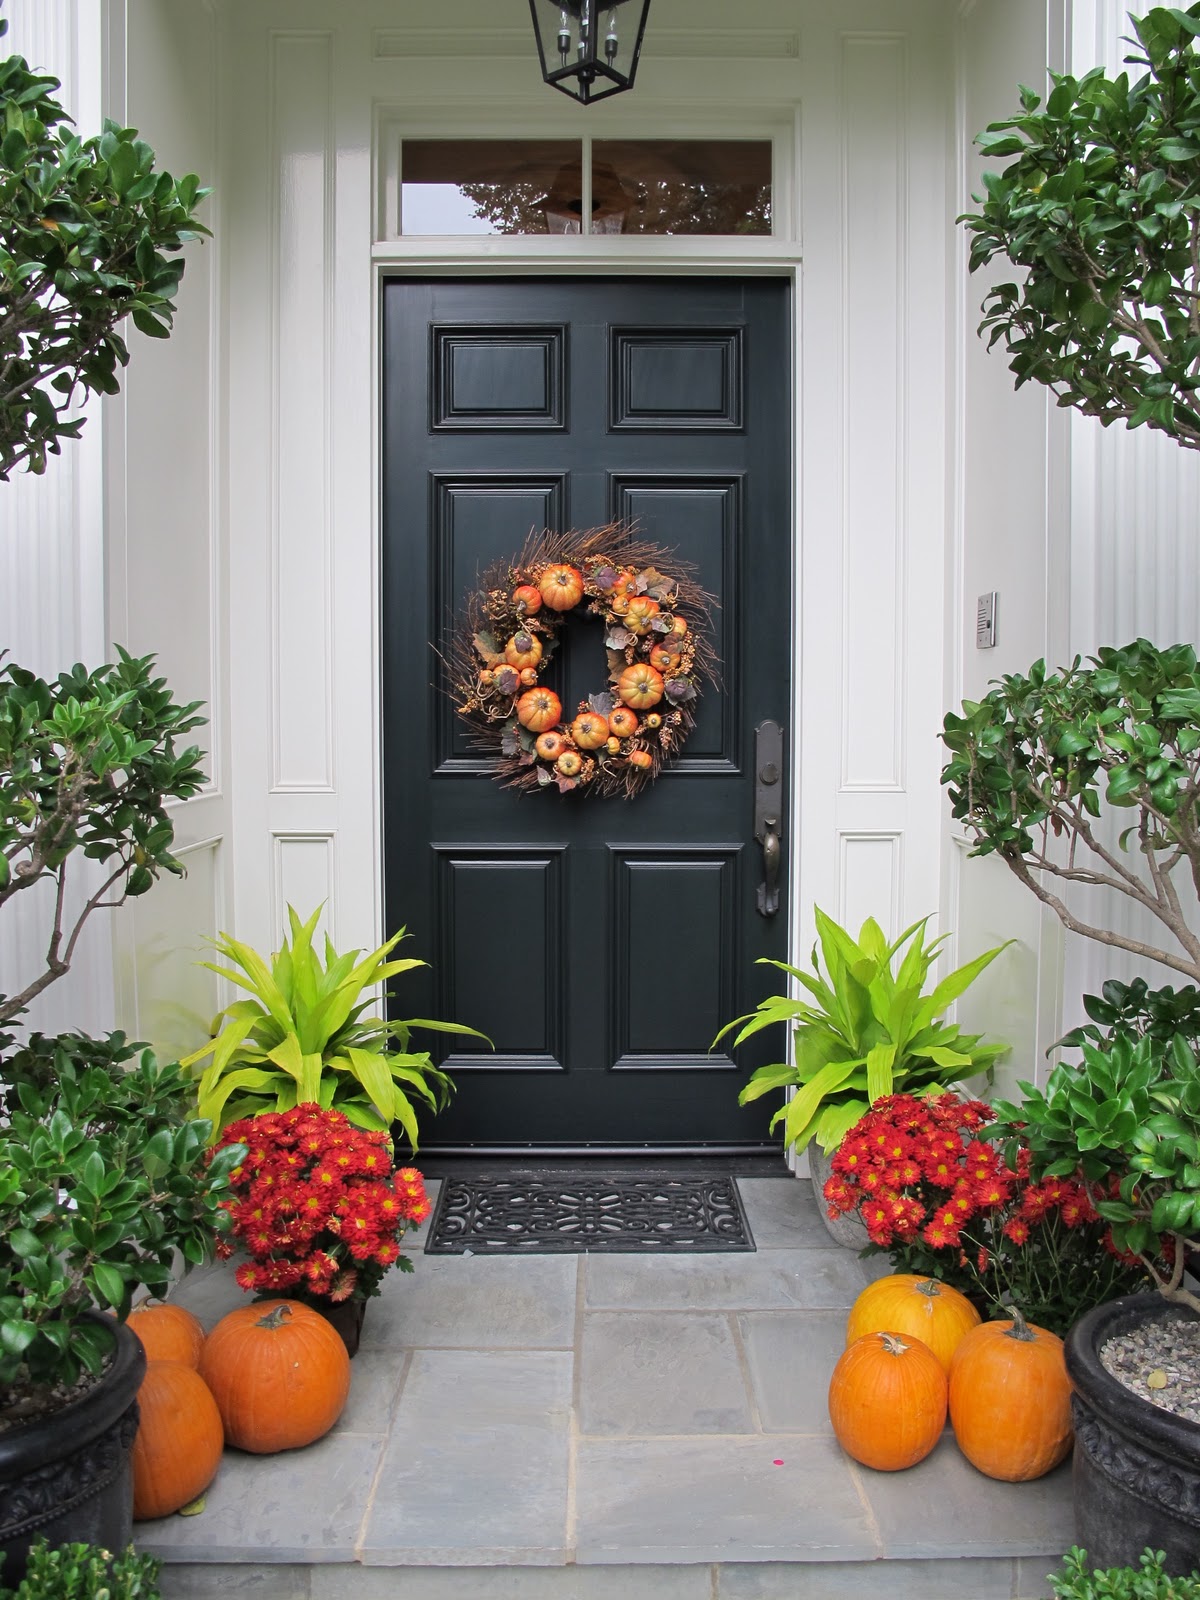 oversized-plant-pots-and-cute-orange-pumpkin-for-fall-decoration-idea-also-modern-wreath-for-front-door